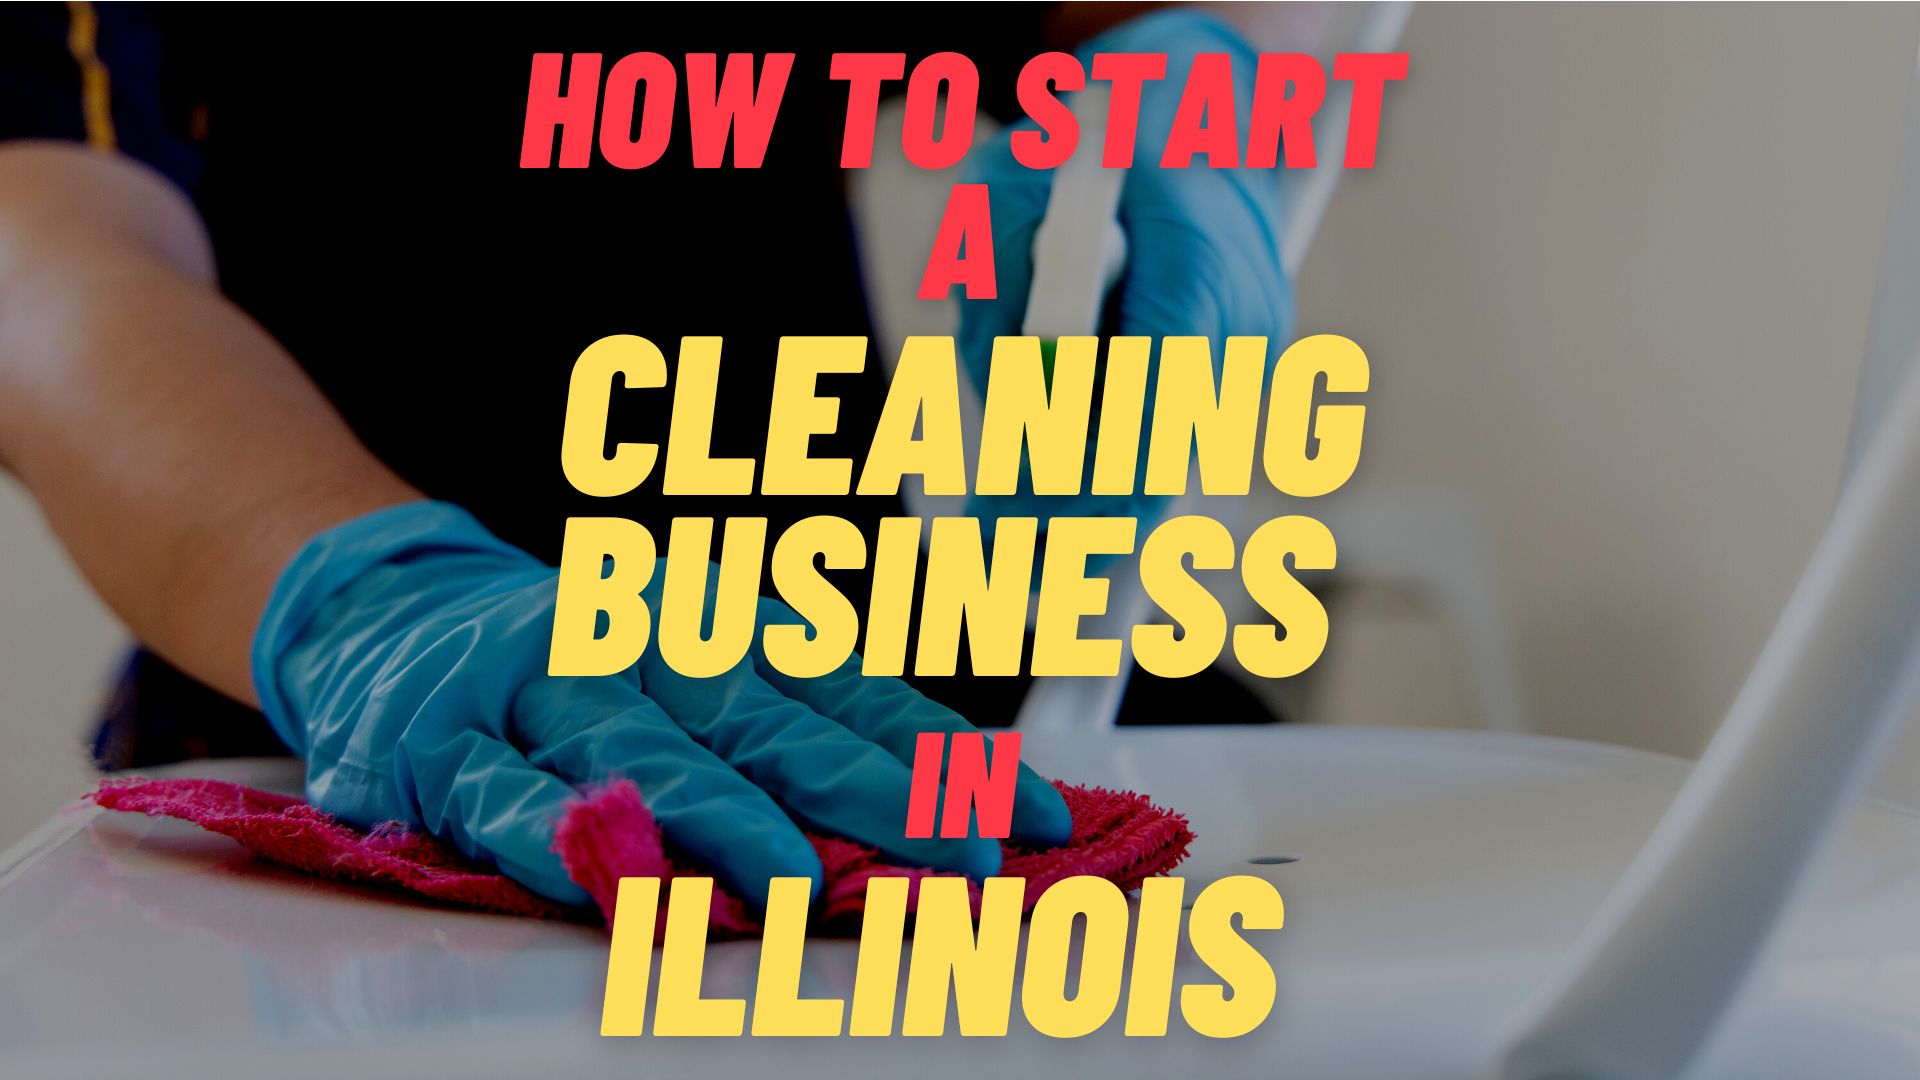 start a cleaning business in Illinois